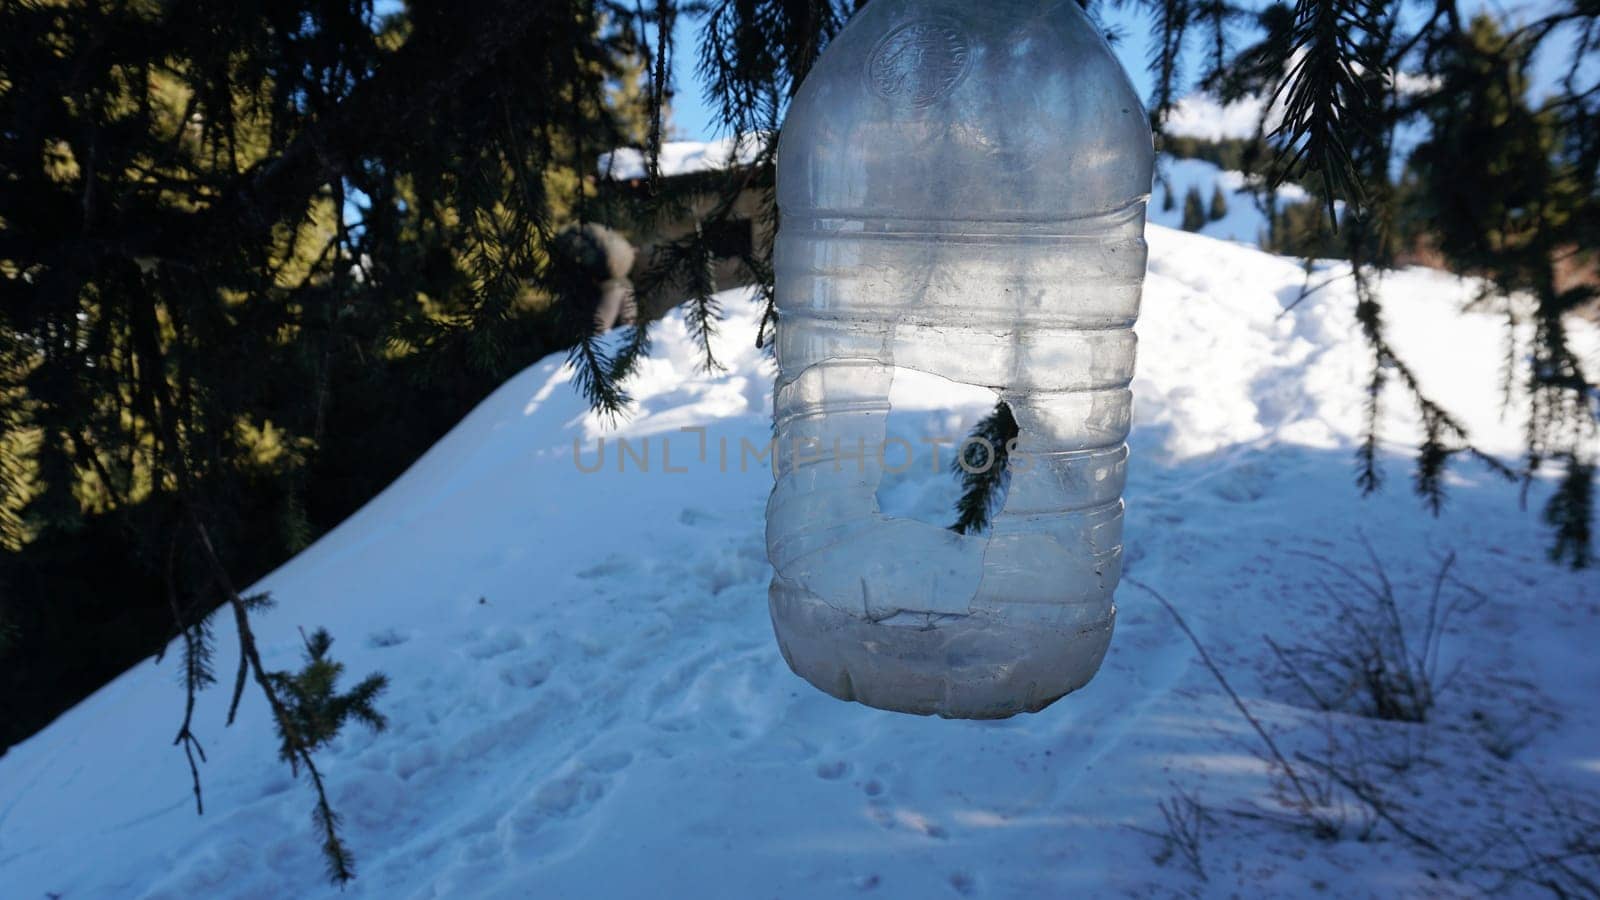 A plastic bottle feeder is hanging on a tree in the forest. Coniferous branches of a Christmas tree with sharp needles. There is white snow, the trail is visible. Dry bushes stick out of the snow.